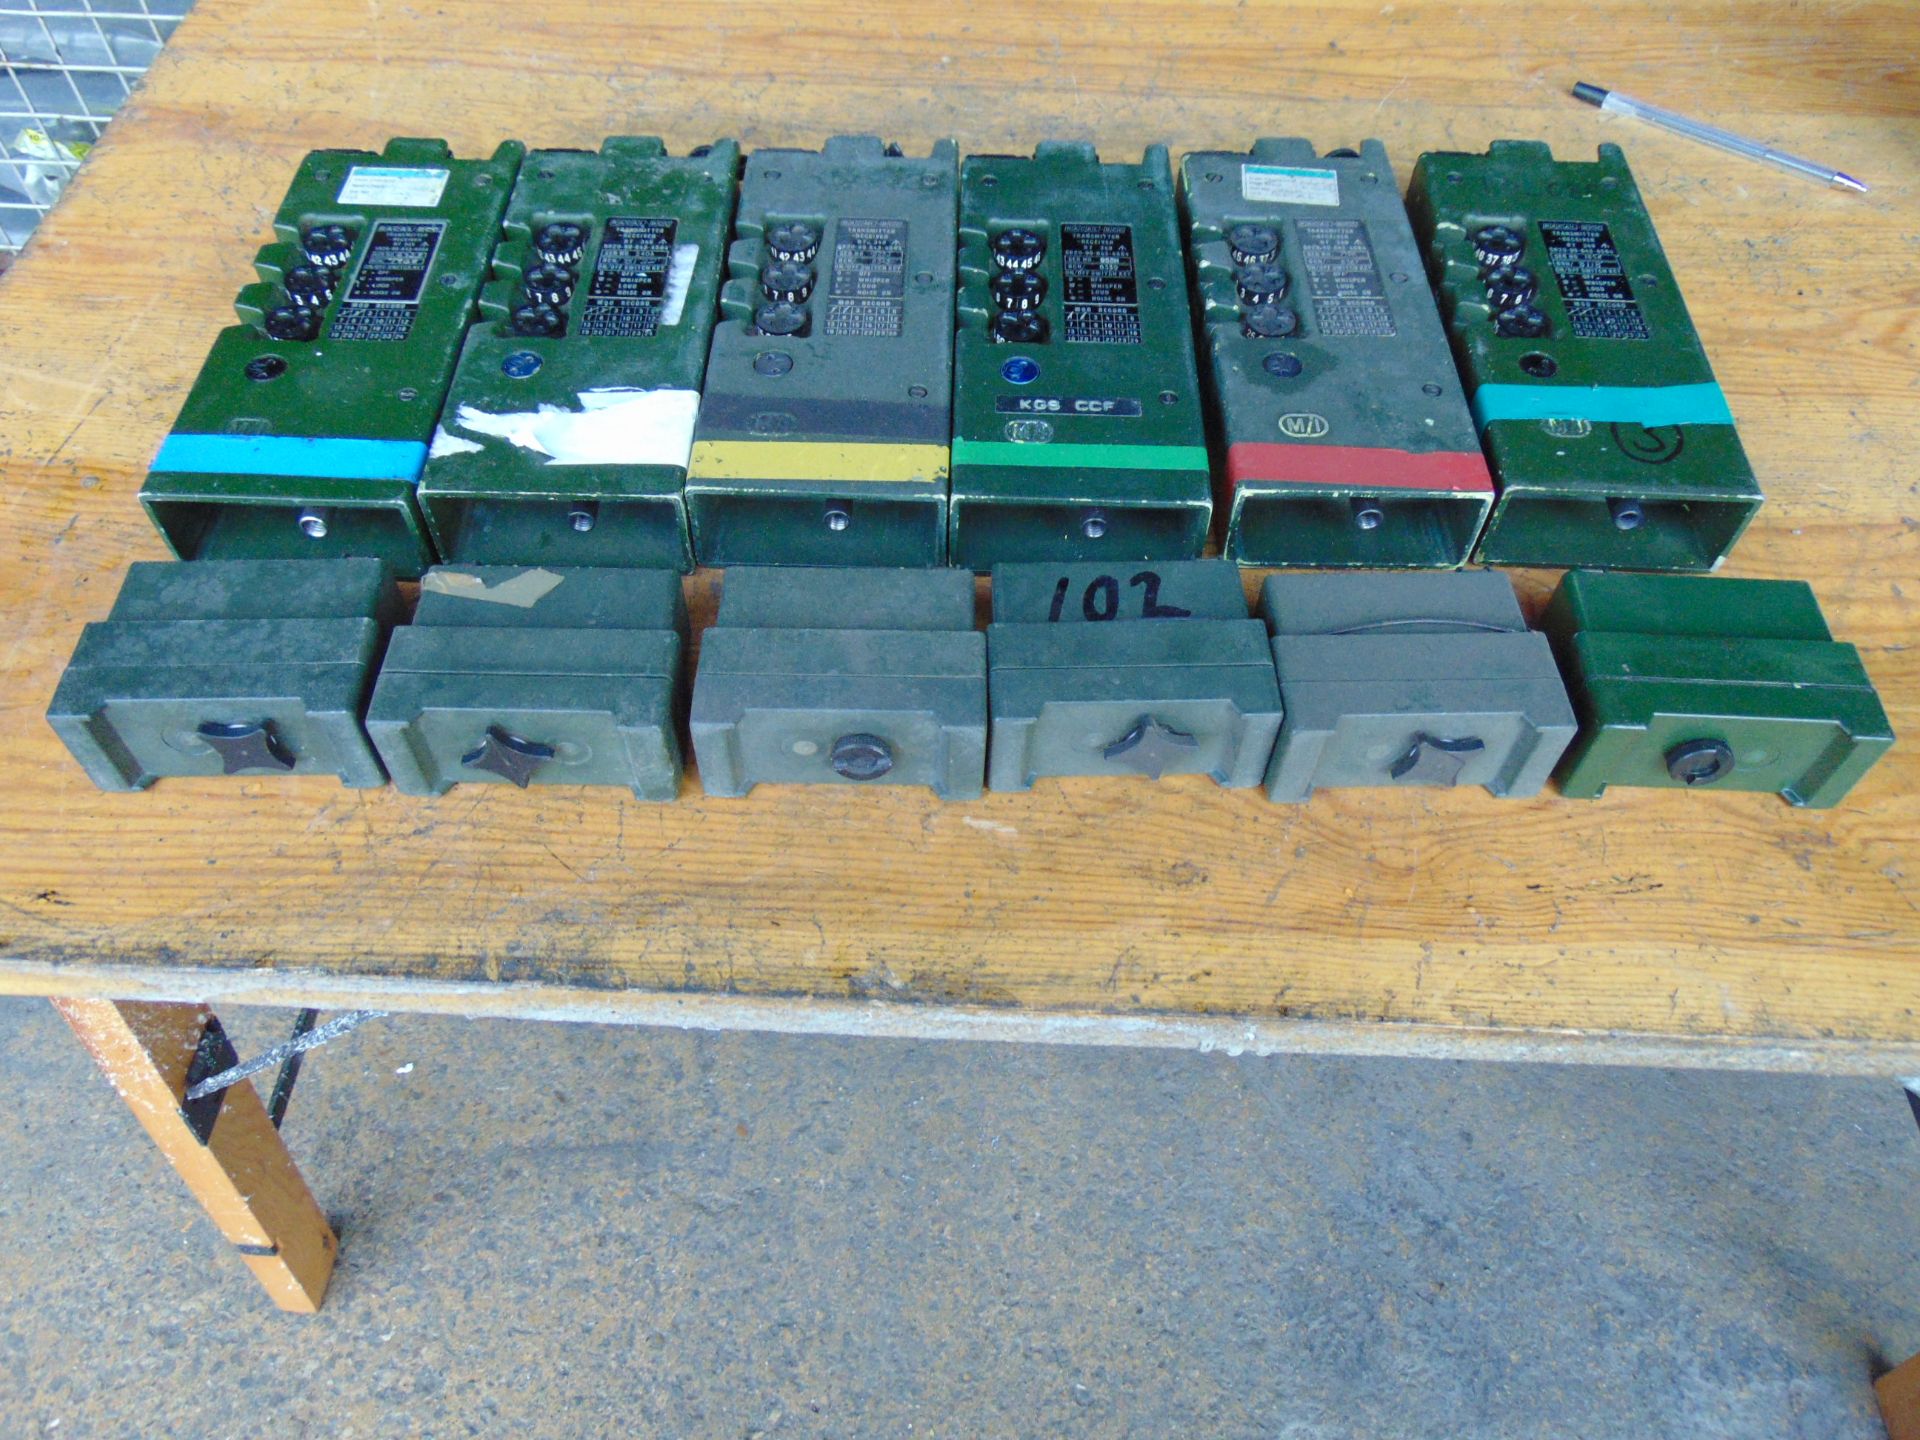 6 x Clansman UK/RT 349 Transmitter Receivers c/w Battery Pack - Image 5 of 5